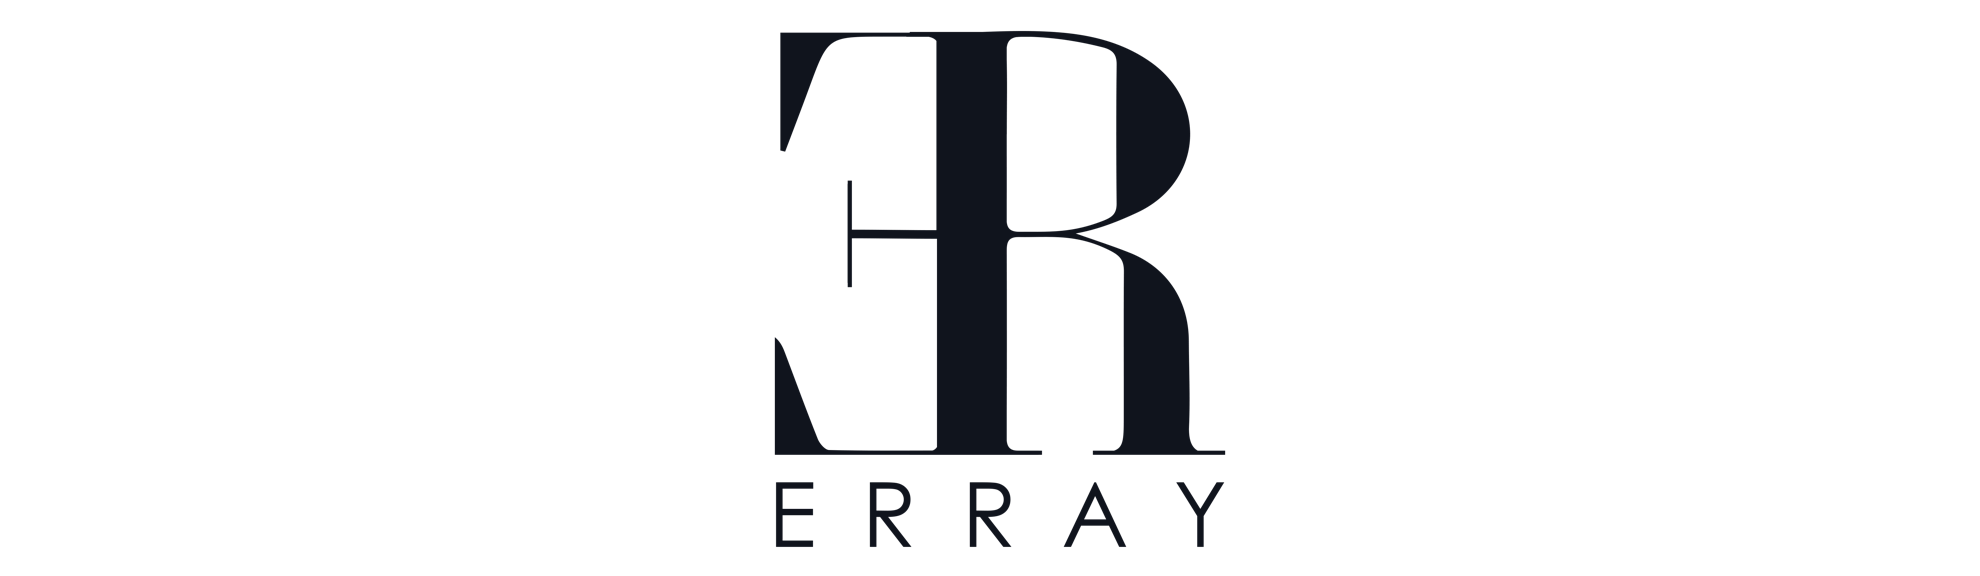 cropped-erraylogo-copy.png